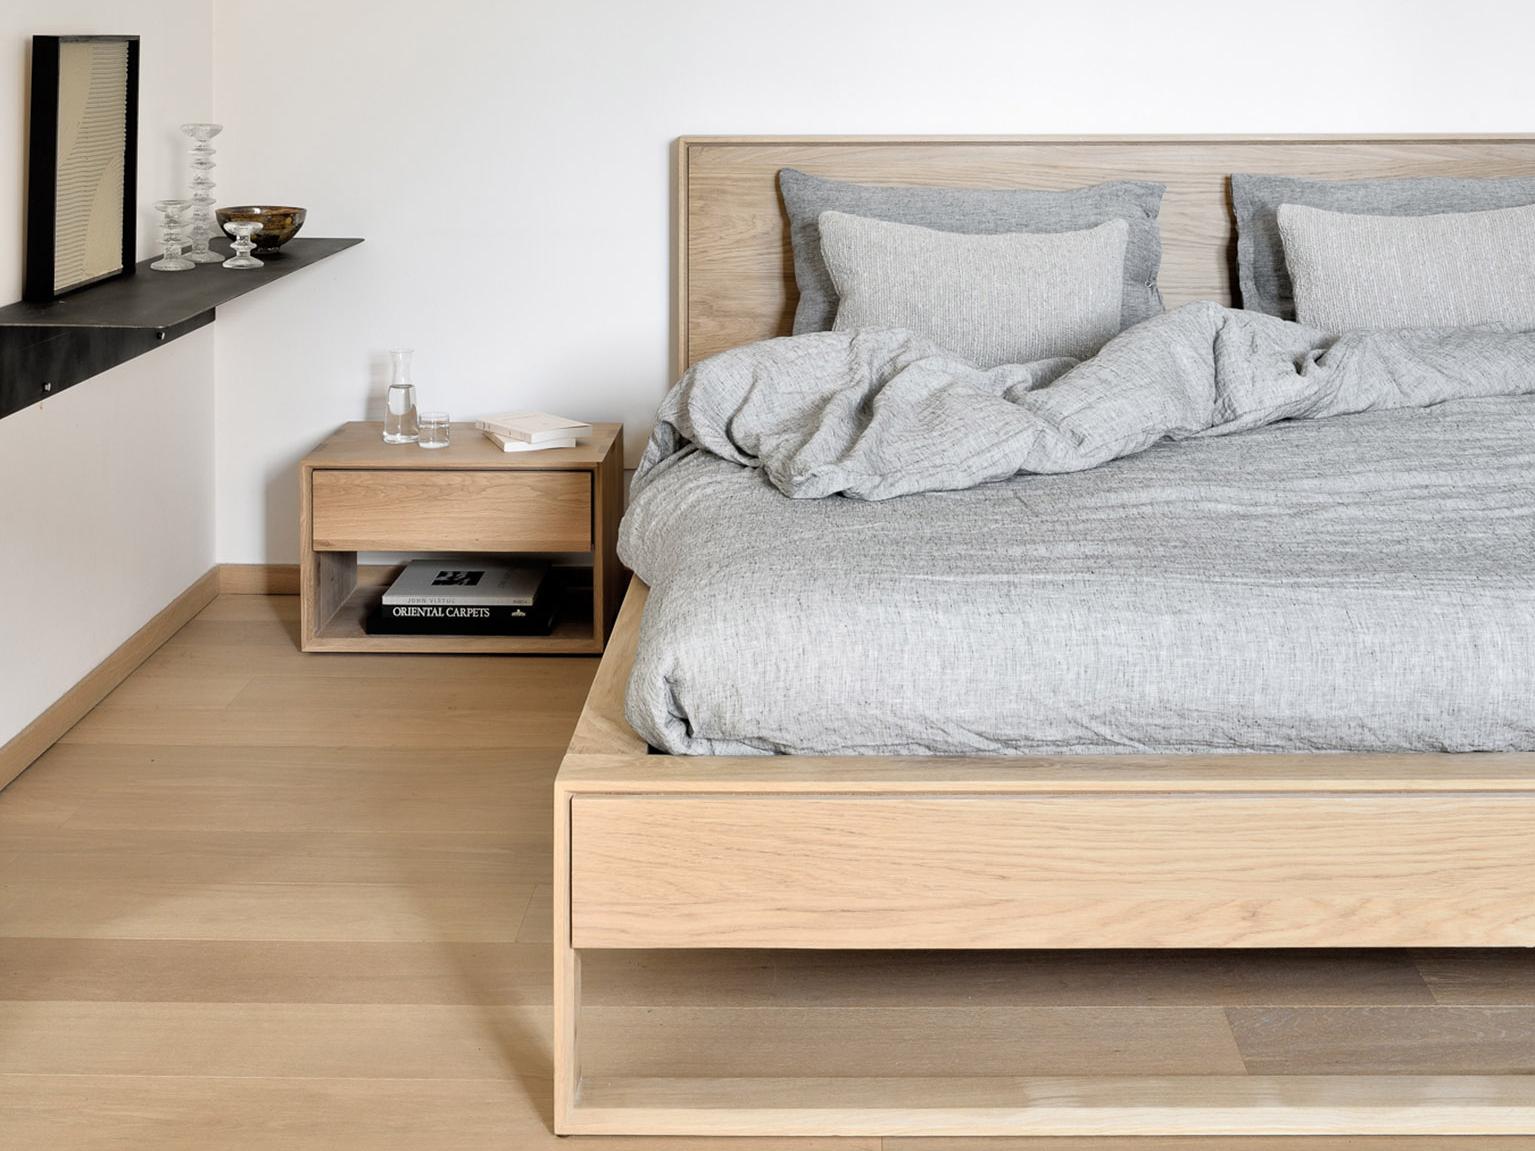 Bed and bedside table in solid oak | Live Light 